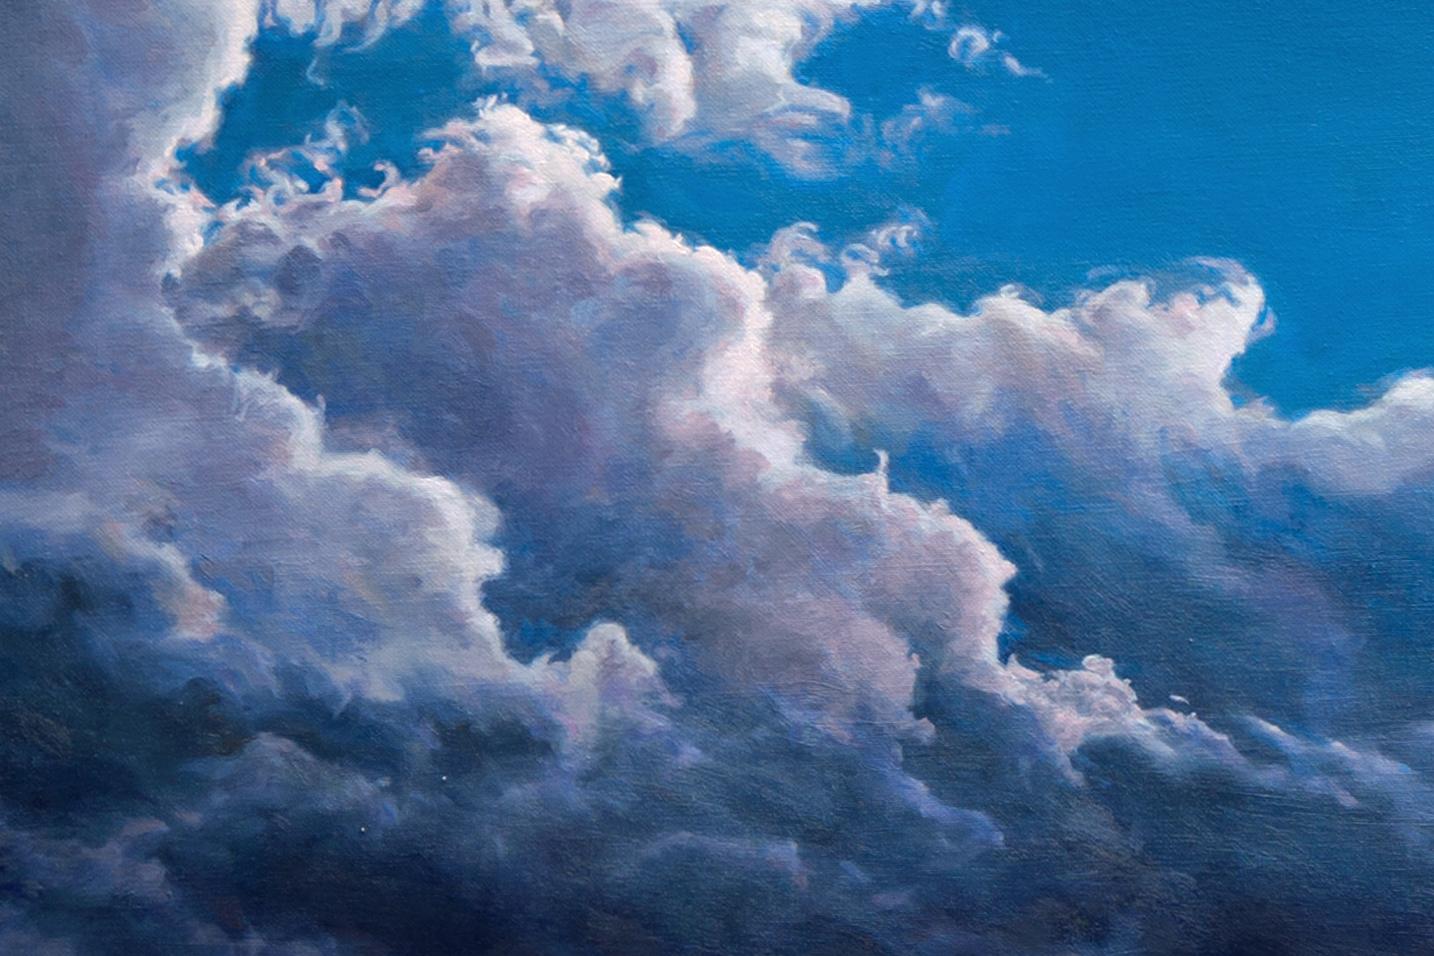 Big skies evoke the excitement of a child, chasing fantastical cloud shapes as they blossom and curl against a deep azure sky. This painting is oil on a linen canvas that is 30 x 40 inches, on gallery wrapped linen, 1 1/2 inch deep stretchers, wired